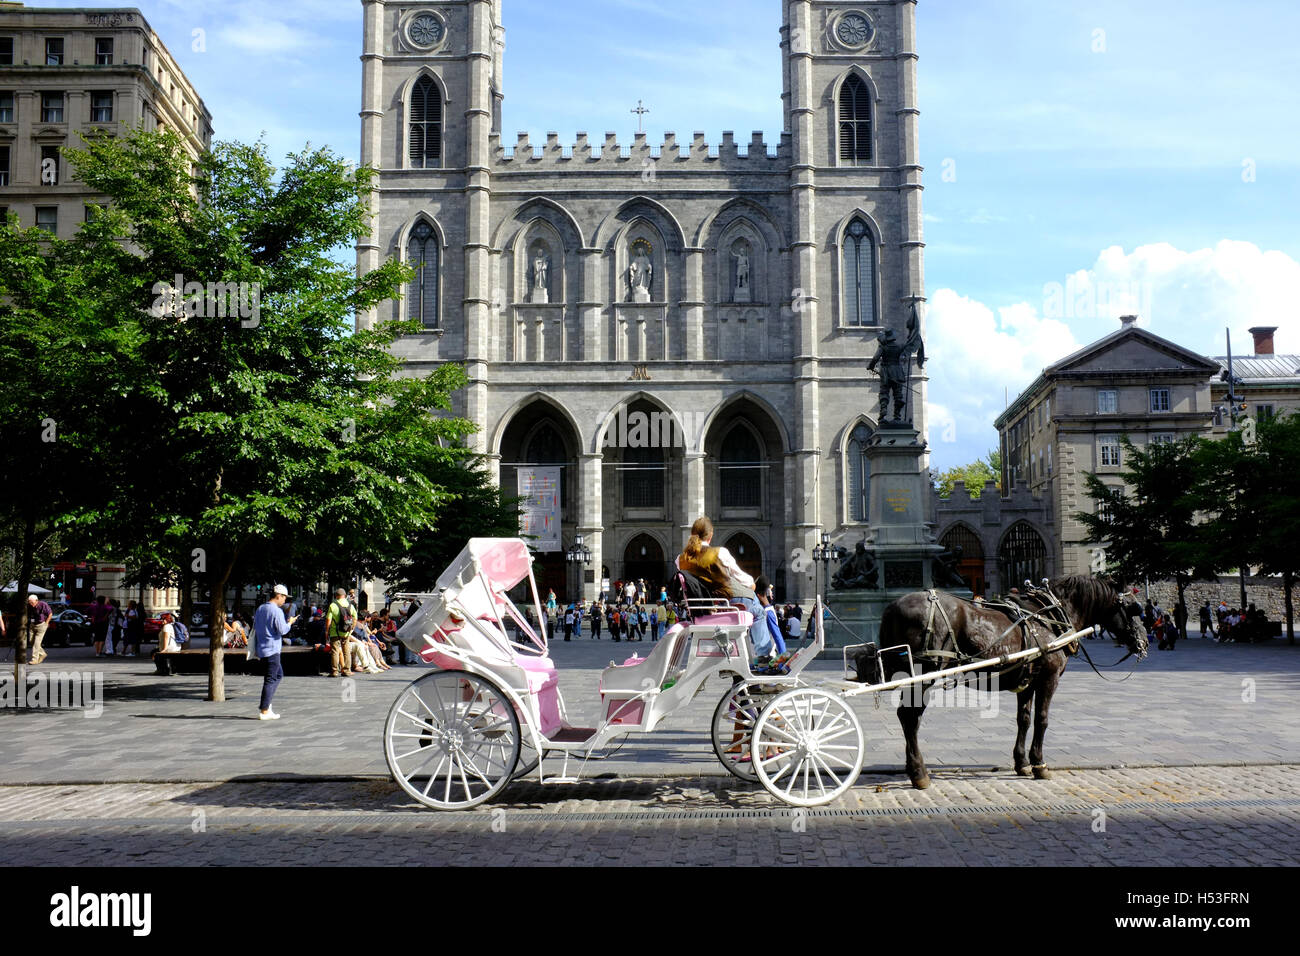 A horse and carriage parked in the Place d' Armes in Montreal Stock Photo